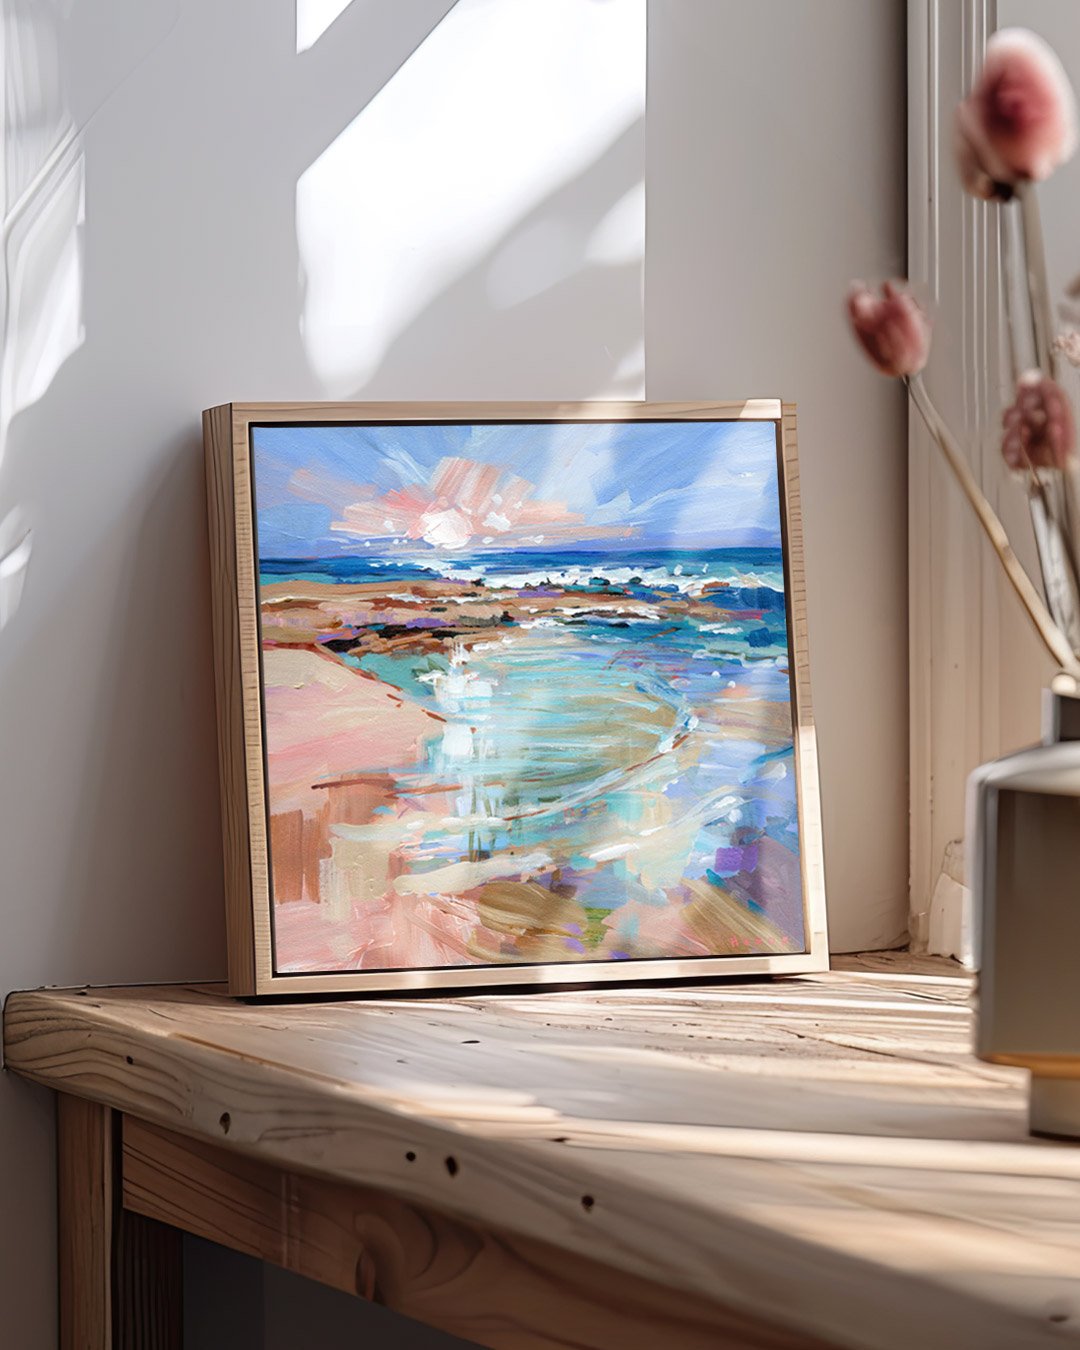 B E F O R E  T H E  T U R N⁣
⁣
Art is everything &amp; Everything is art.⁣
⁣
✦⁣
⁣
The Moonlit Collection debuts at the @affordableartfairau today! Don't miss out!⁣
⁣
☾⁣
⁣
♡ Honor⁣
⁣
Before the Turn⁣
33 x 33 cm framed in oak⁣
$490⁣
⁣
Available via @ar